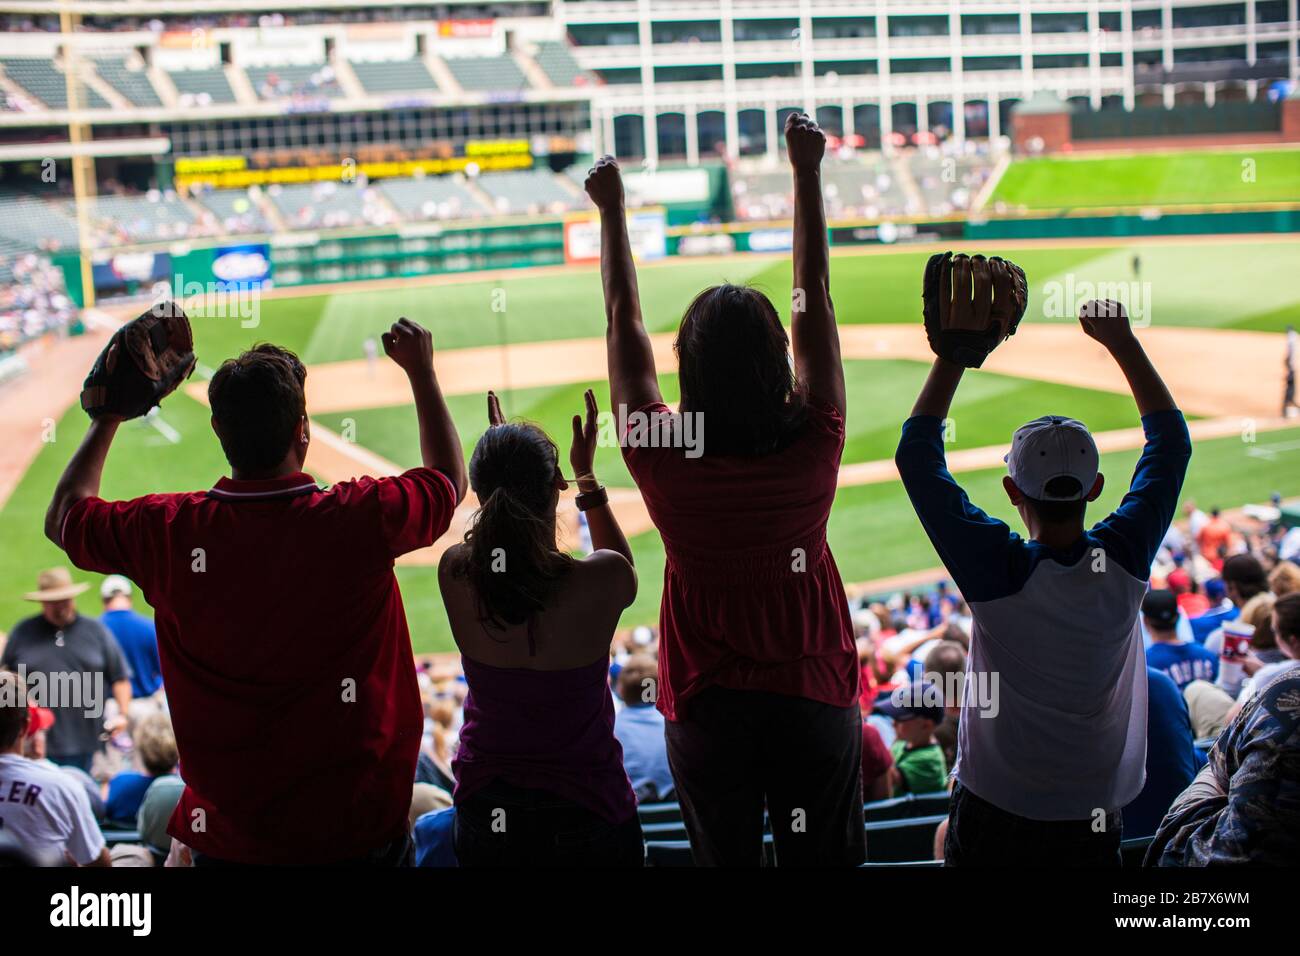 Family cheering on a baseball game at a sports stadium. Stock Photo